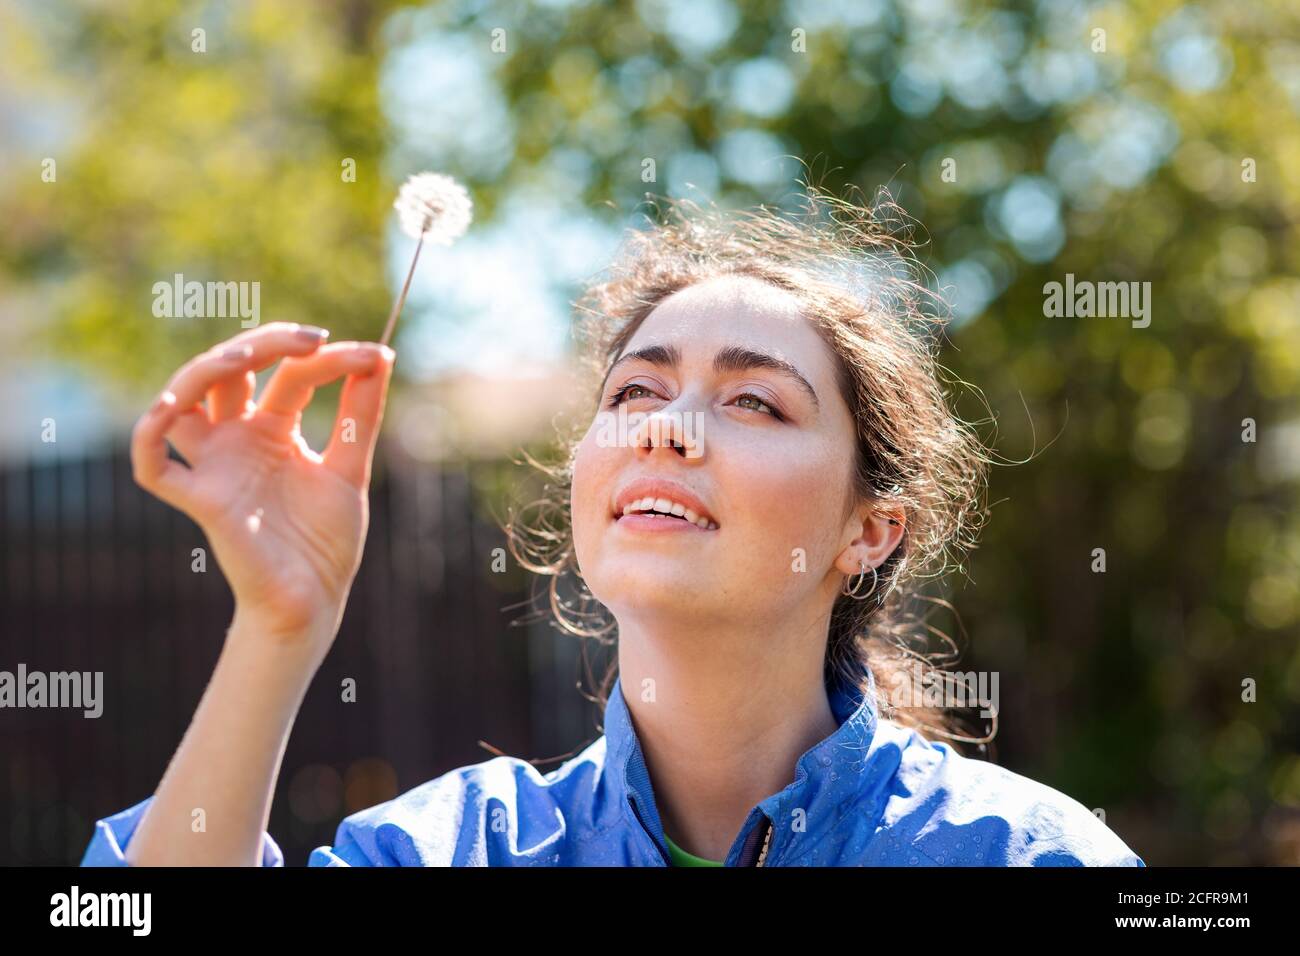 Spring and happiness. Portrait of a Young woman holding a dandelion and looking at it with a smile. Stock Photo